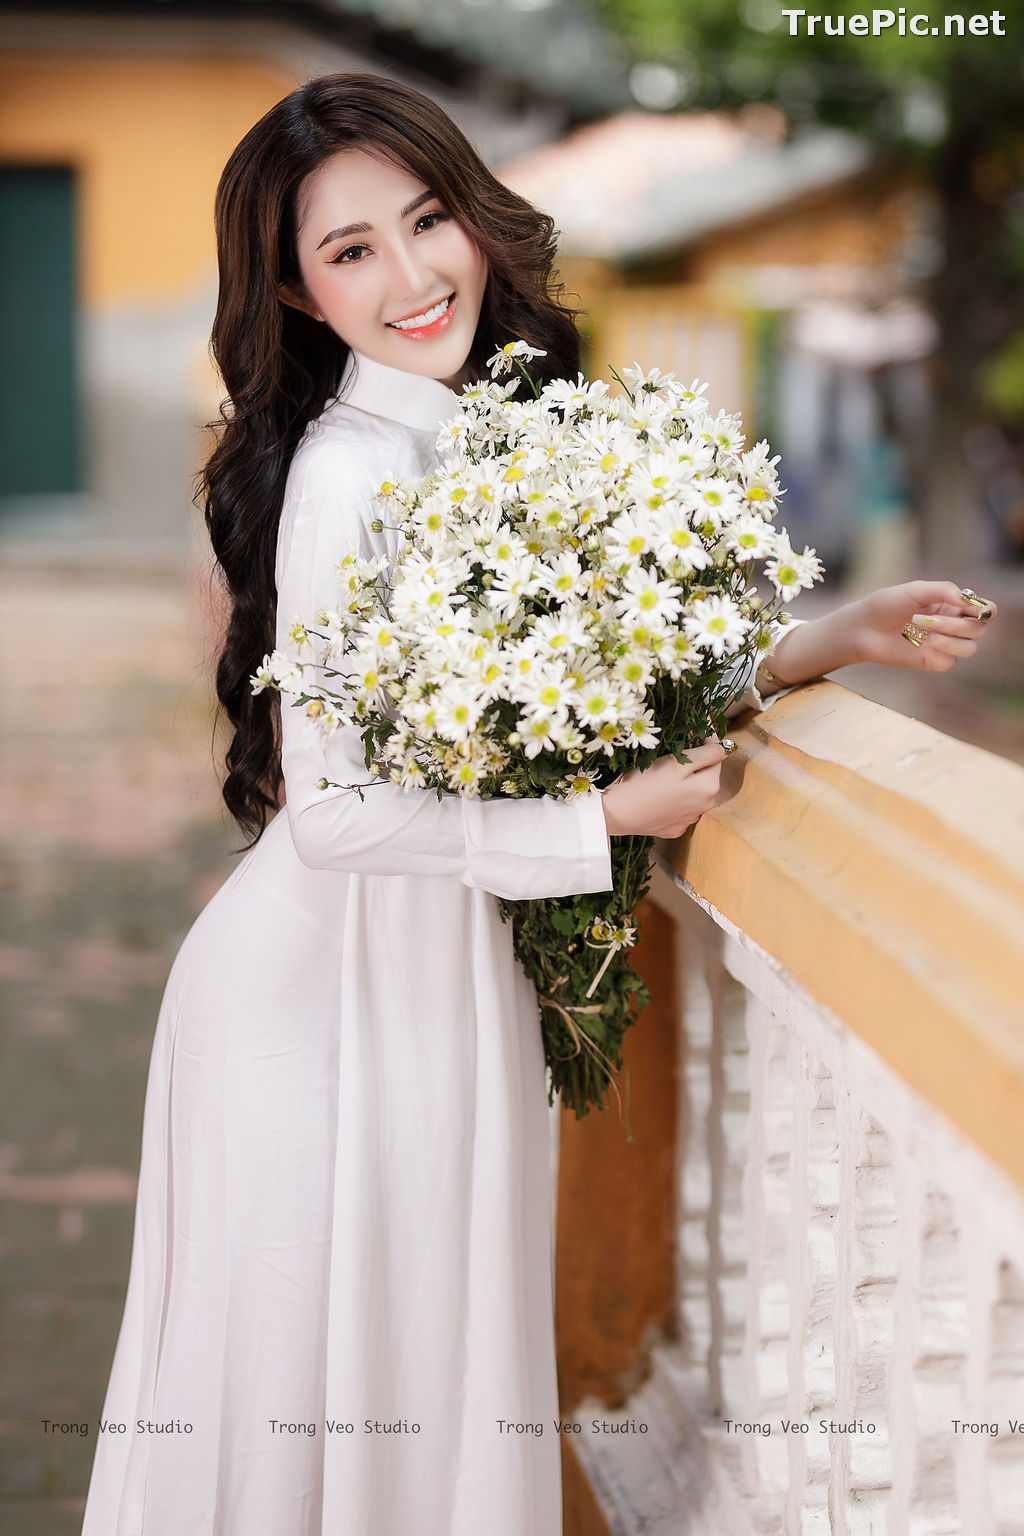 Image The Beauty of Vietnamese Girls with Traditional Dress (Ao Dai) #3 - TruePic.net - Picture-21